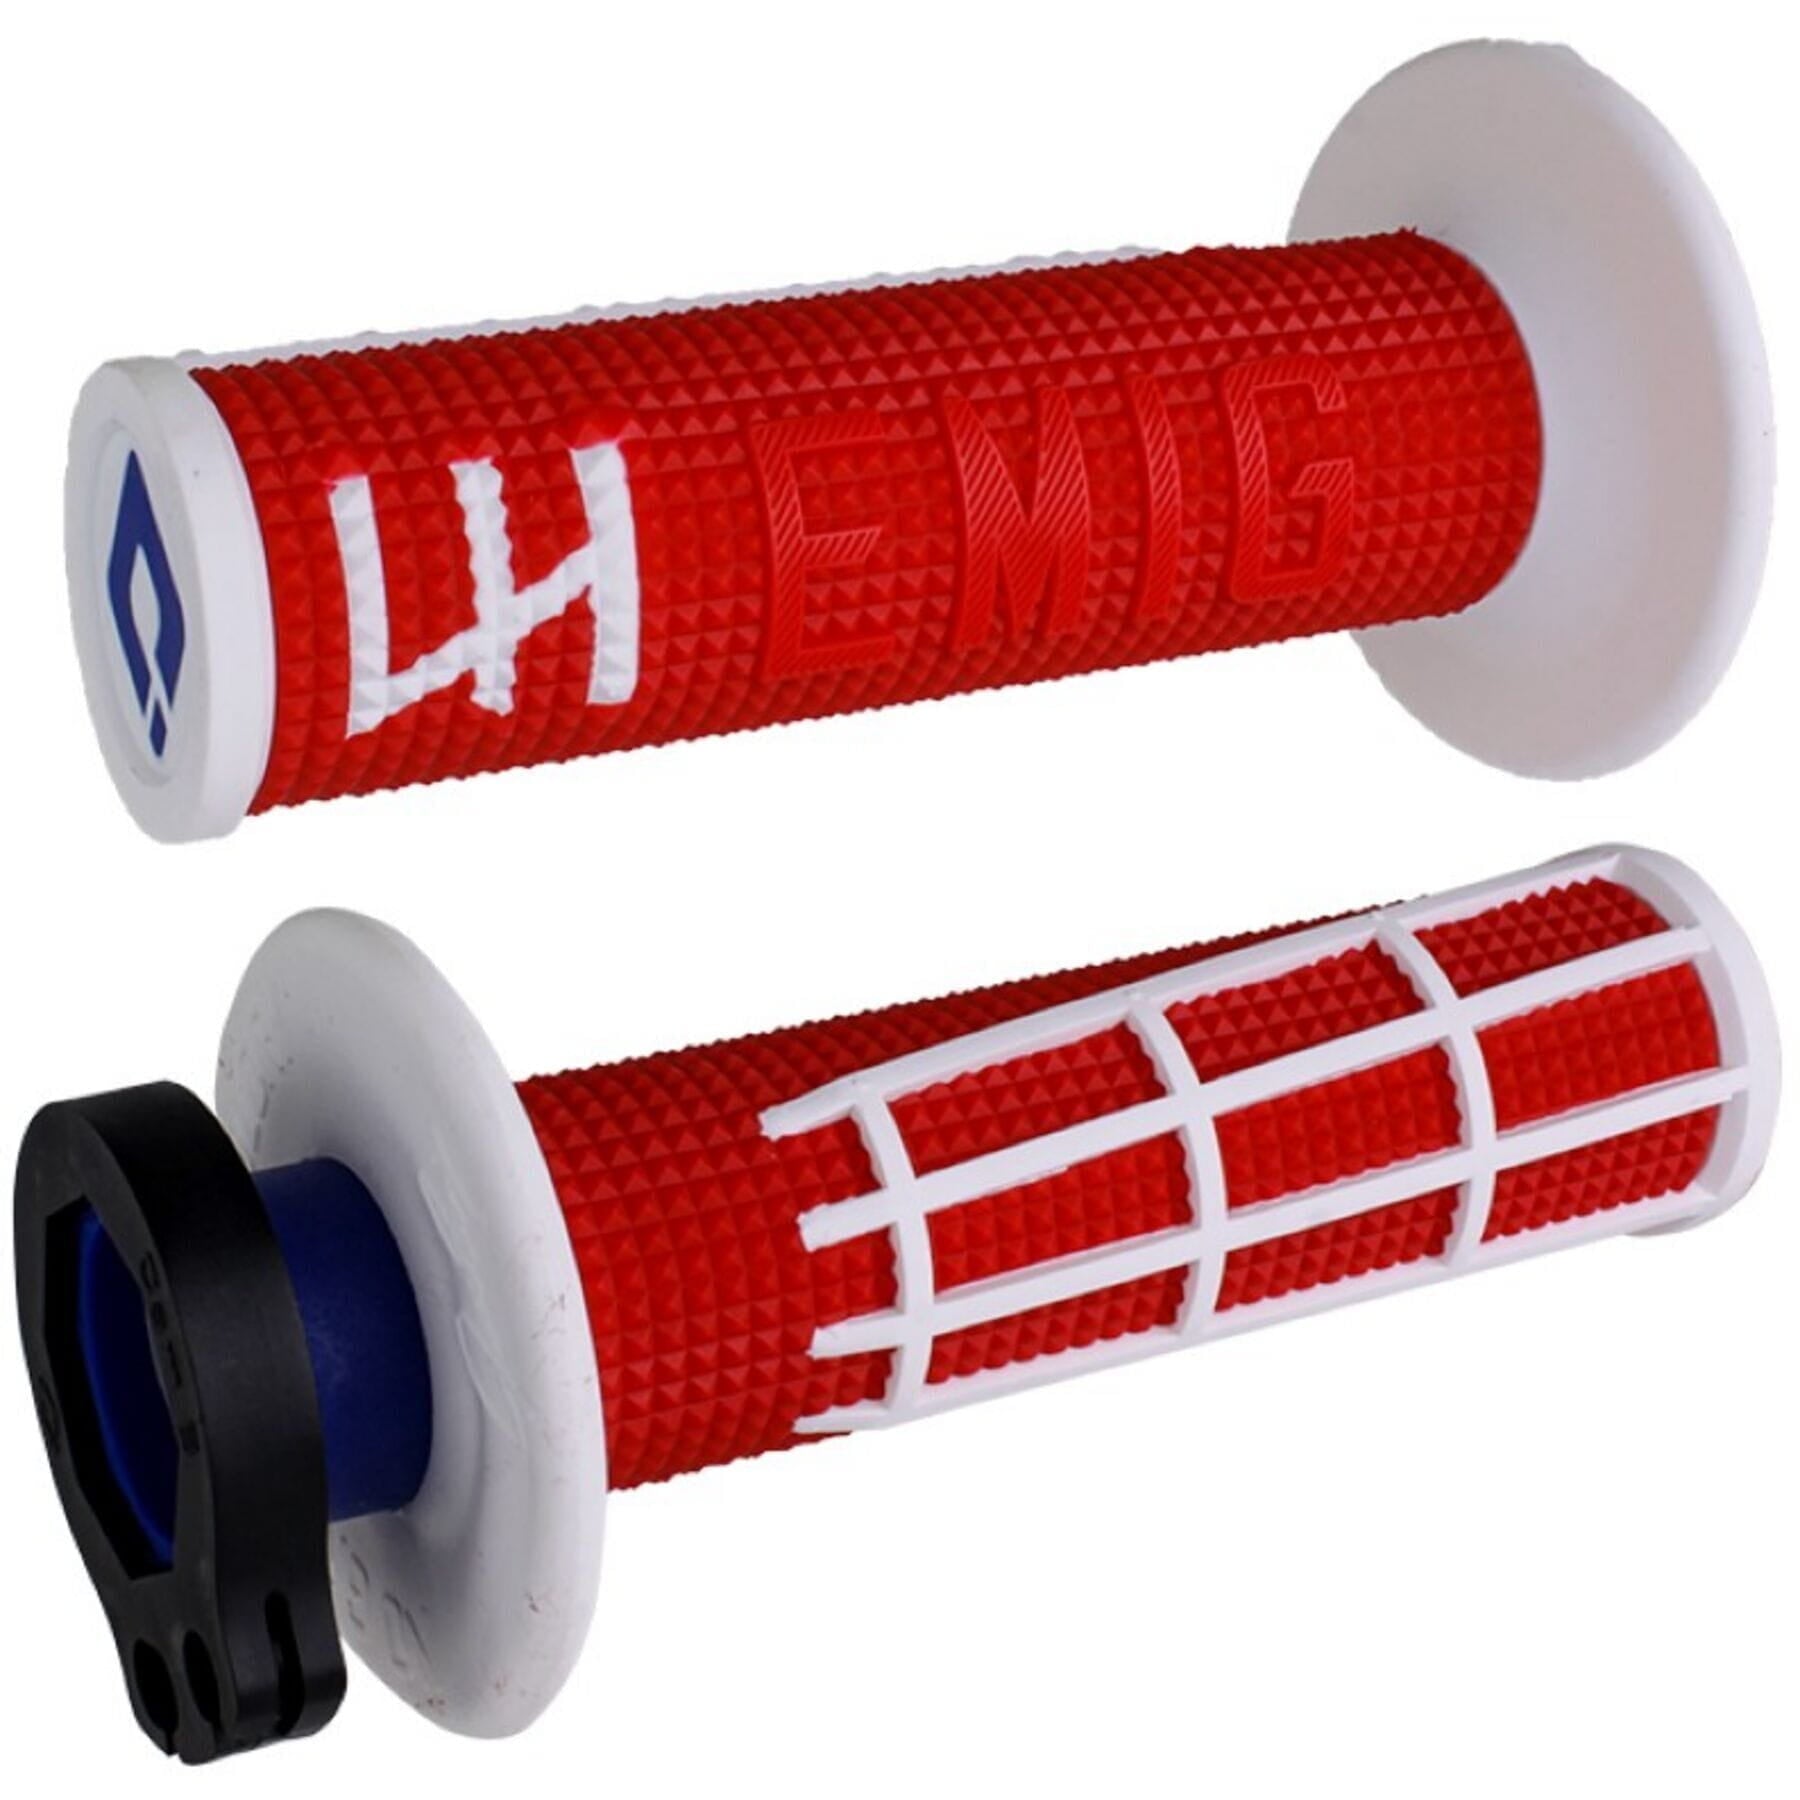 EMIG 2.0 Lock On Grip in Red and White for Motorcycles